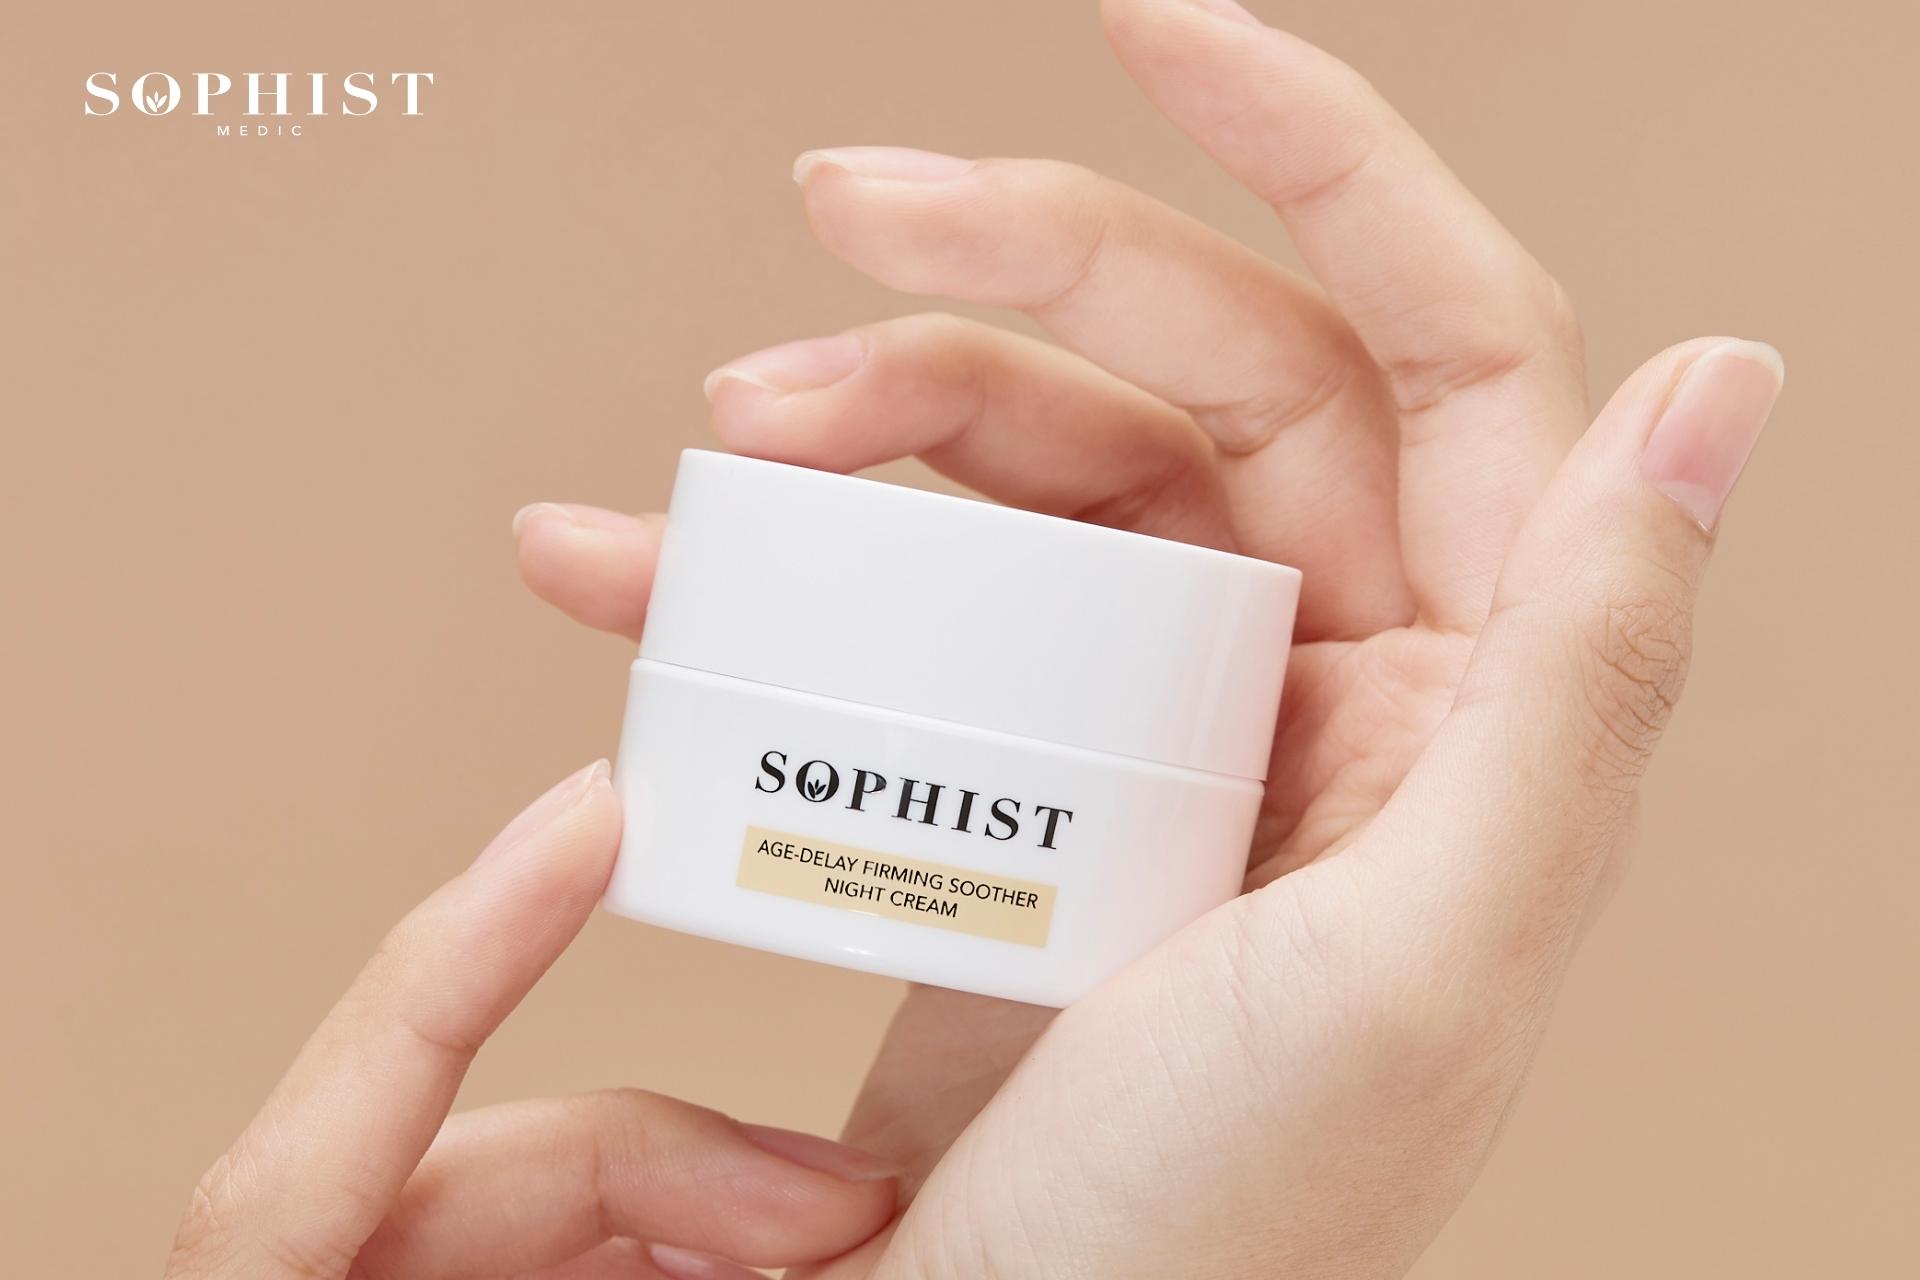 Sophist Age - Delay Firming Soother Night Cream